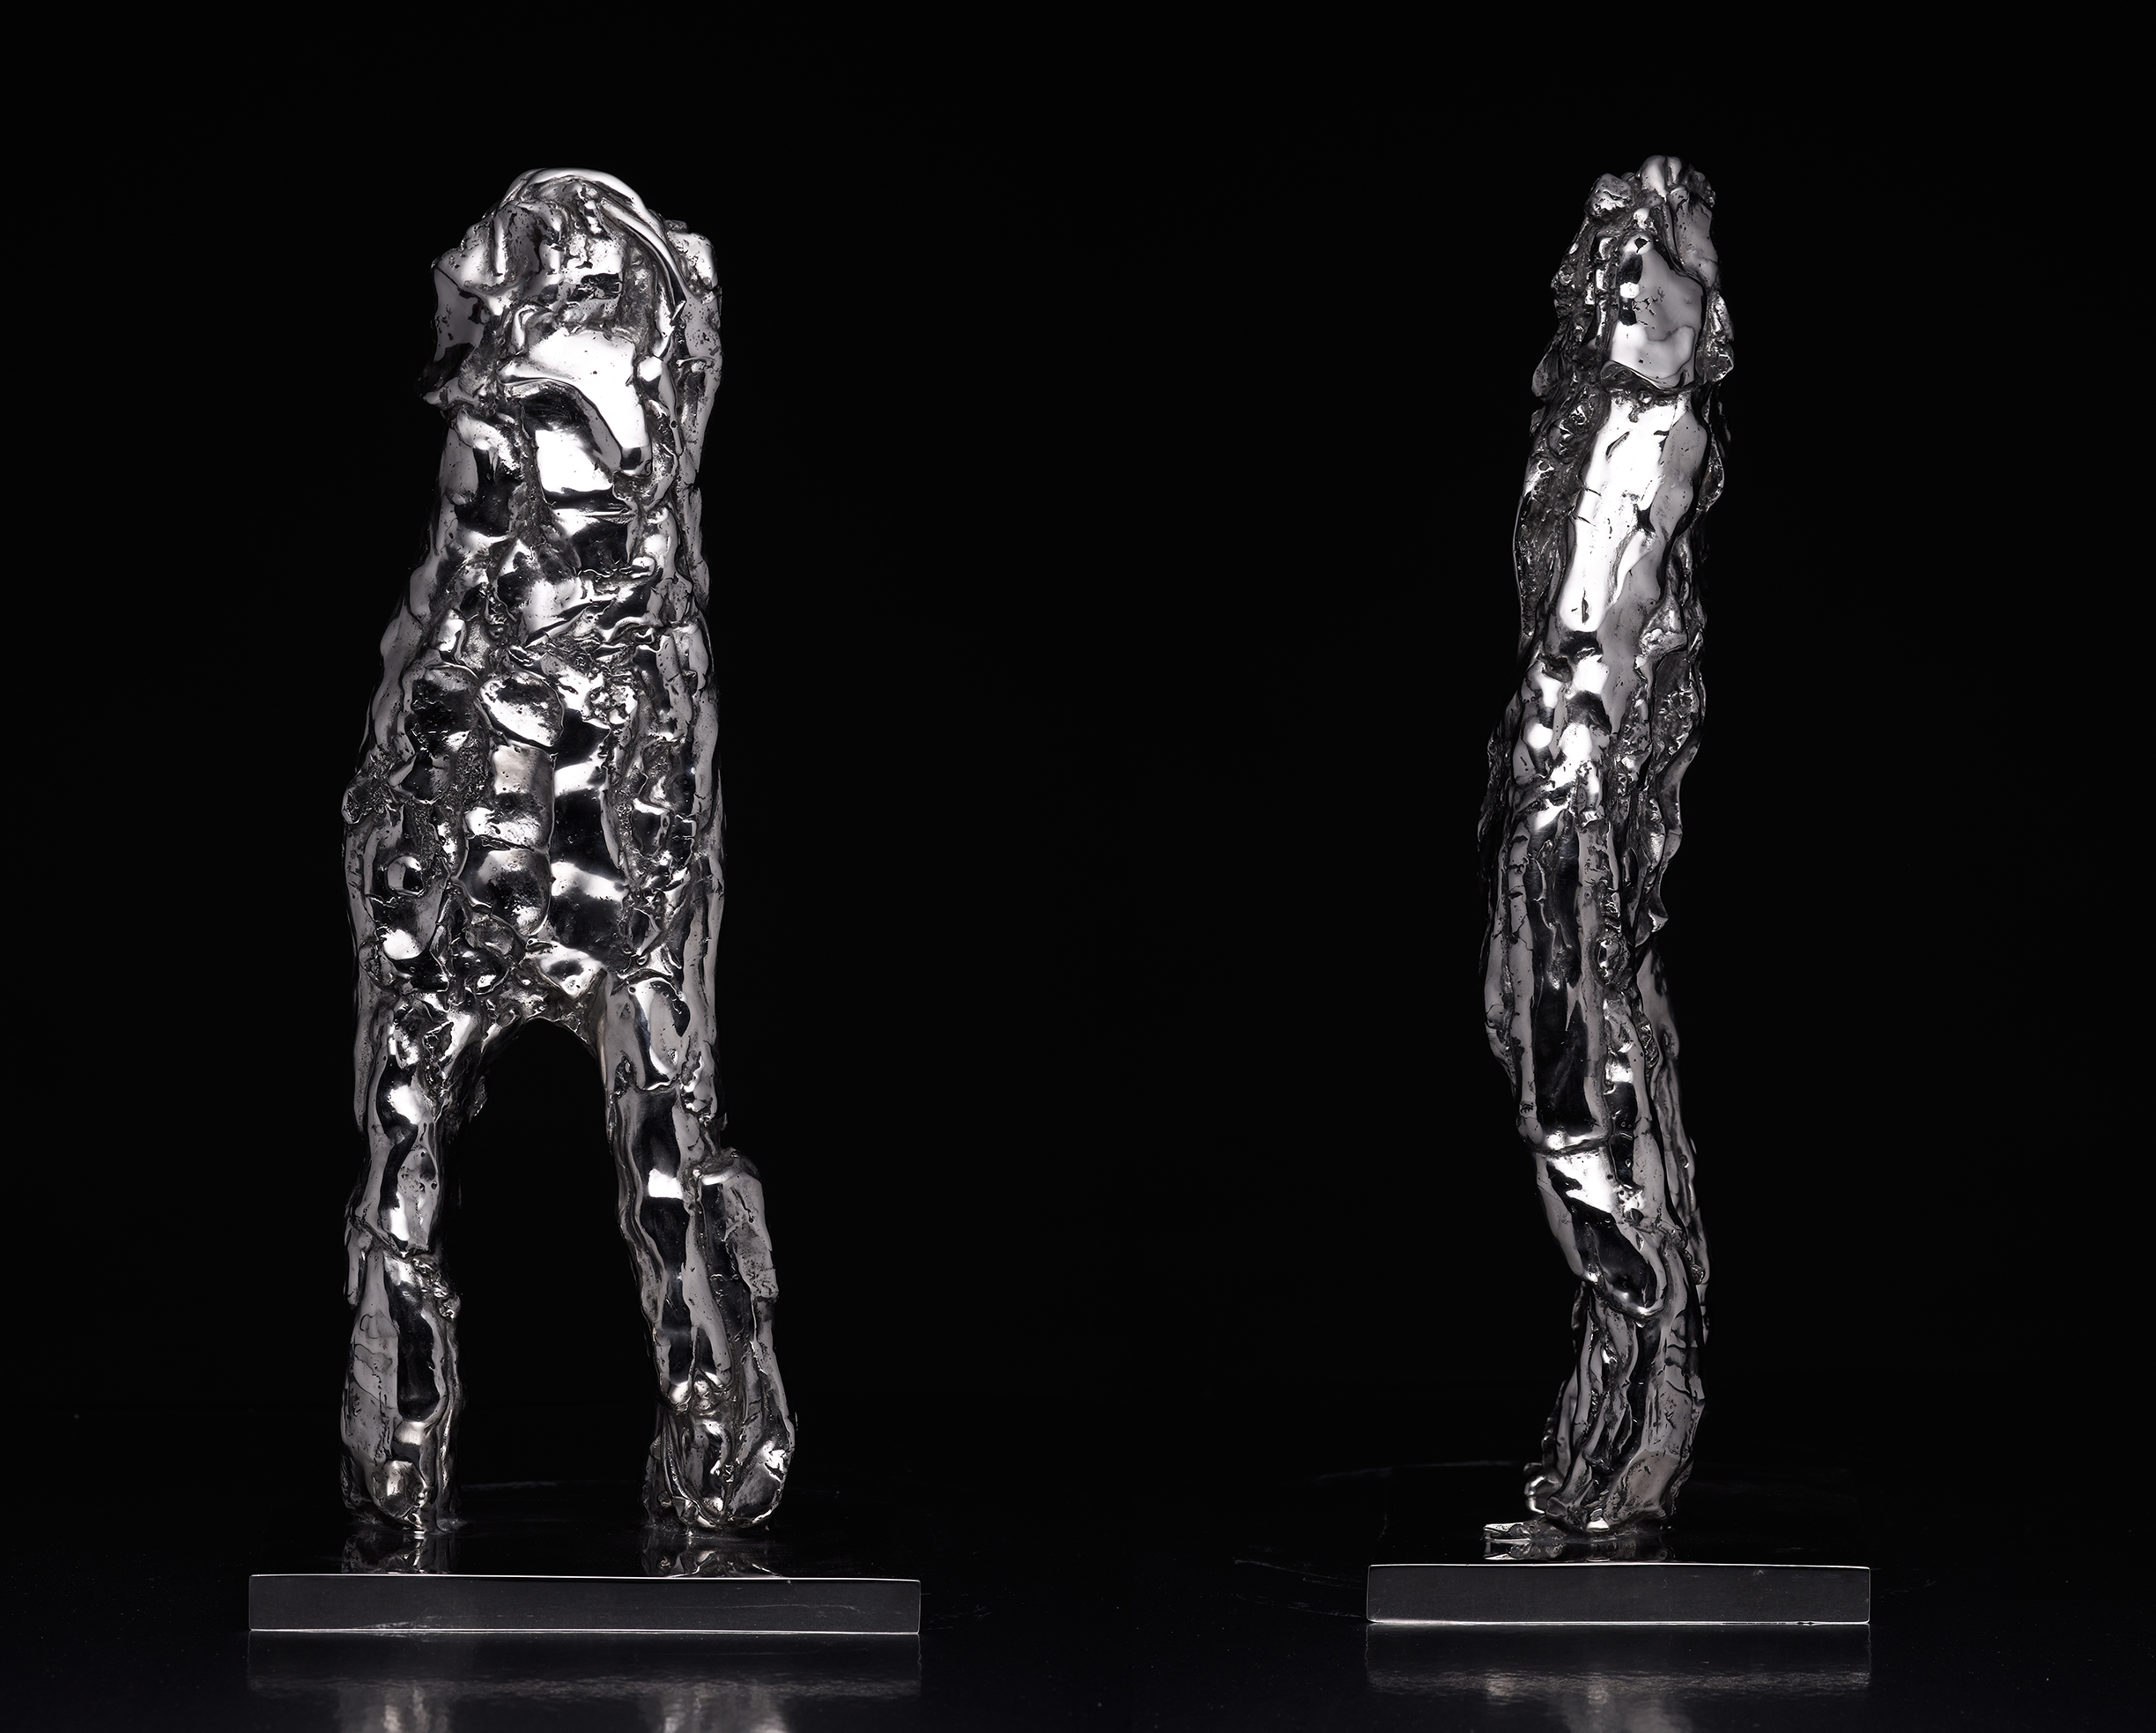 AB2, stainless steel, 16.5" x 5.5" x 3", 2003-2016